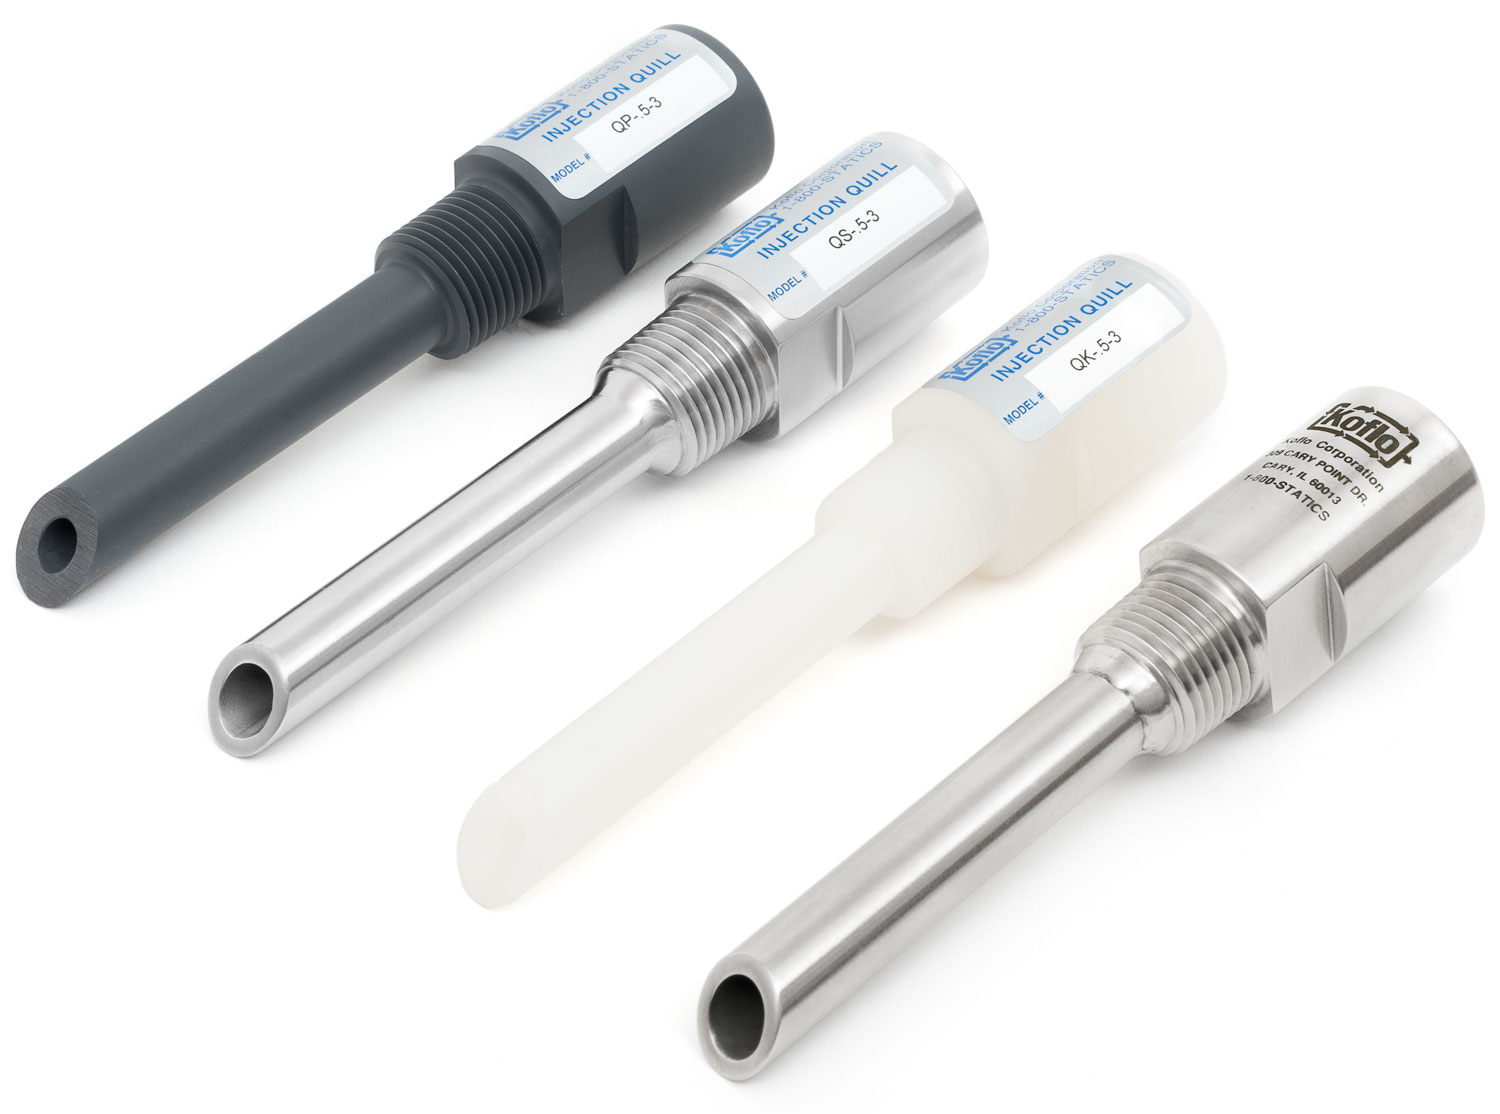 Koflo line of chemical injection quills: PVC, Stainless Steel, Kynar®, and Hastelloy® injection quills